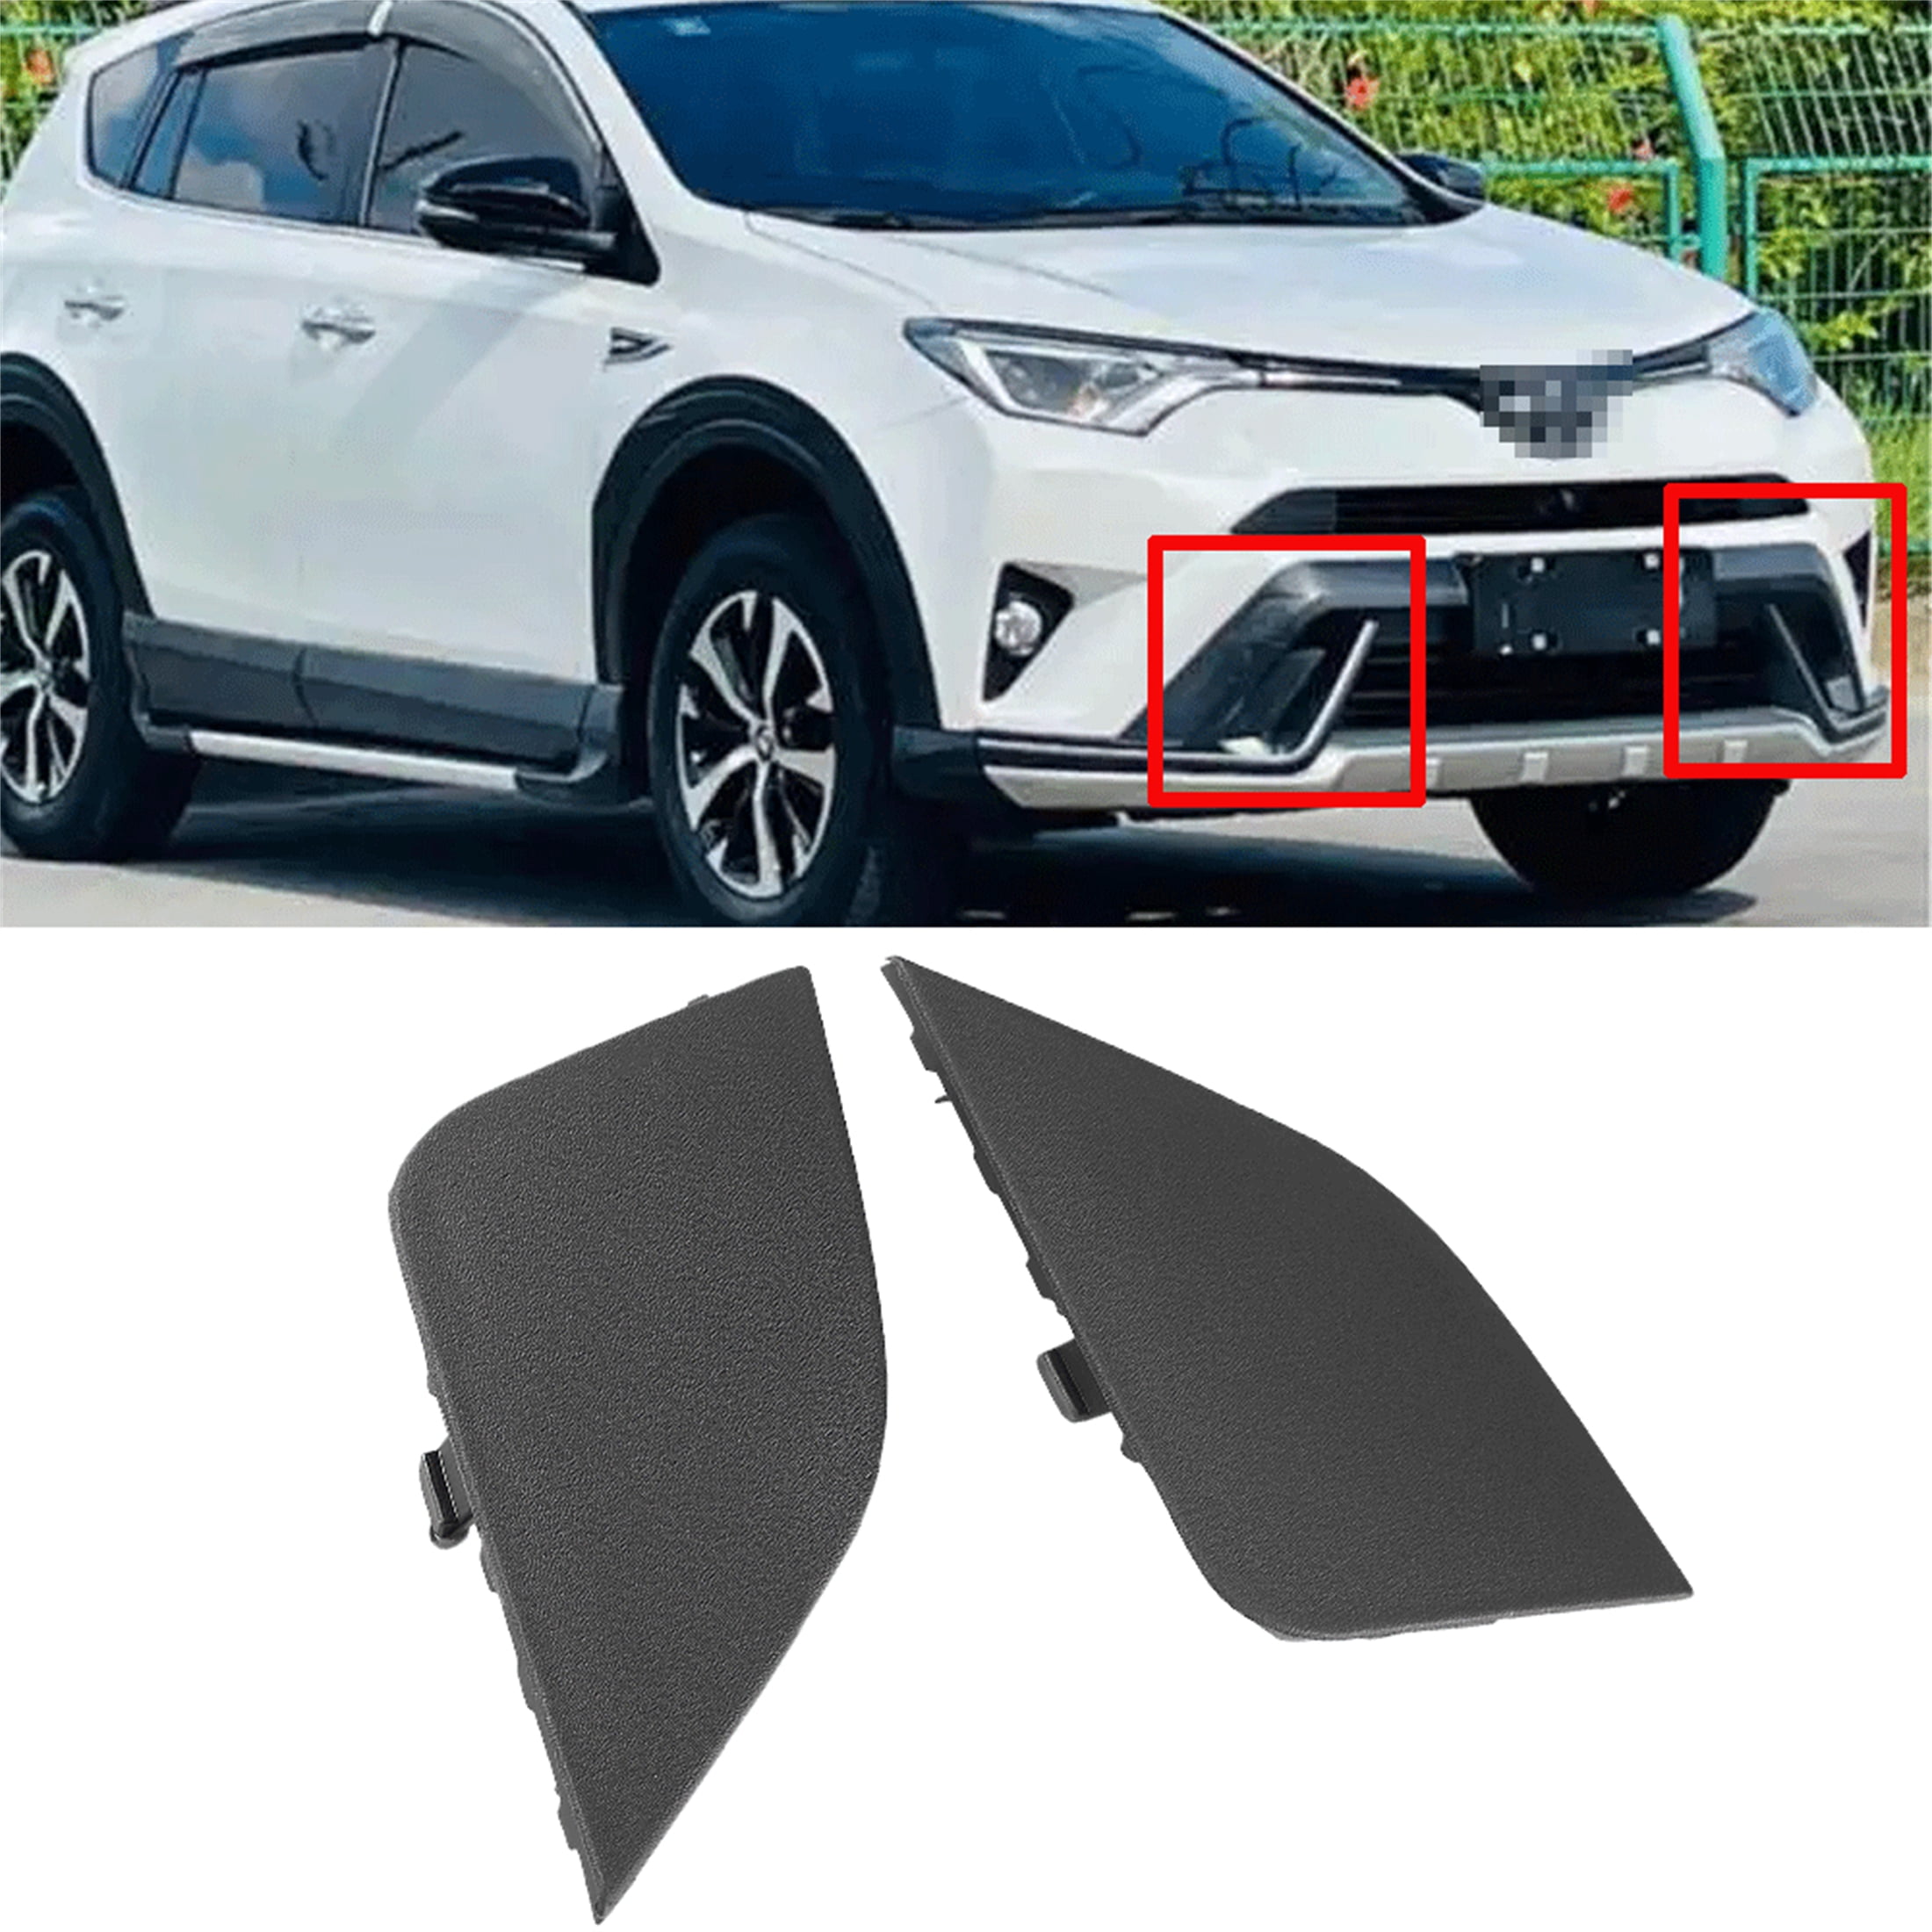 Front Bumper Tow Hook Towing Eye Cover Cap for Toyota RAV4 2016 2017 2018 